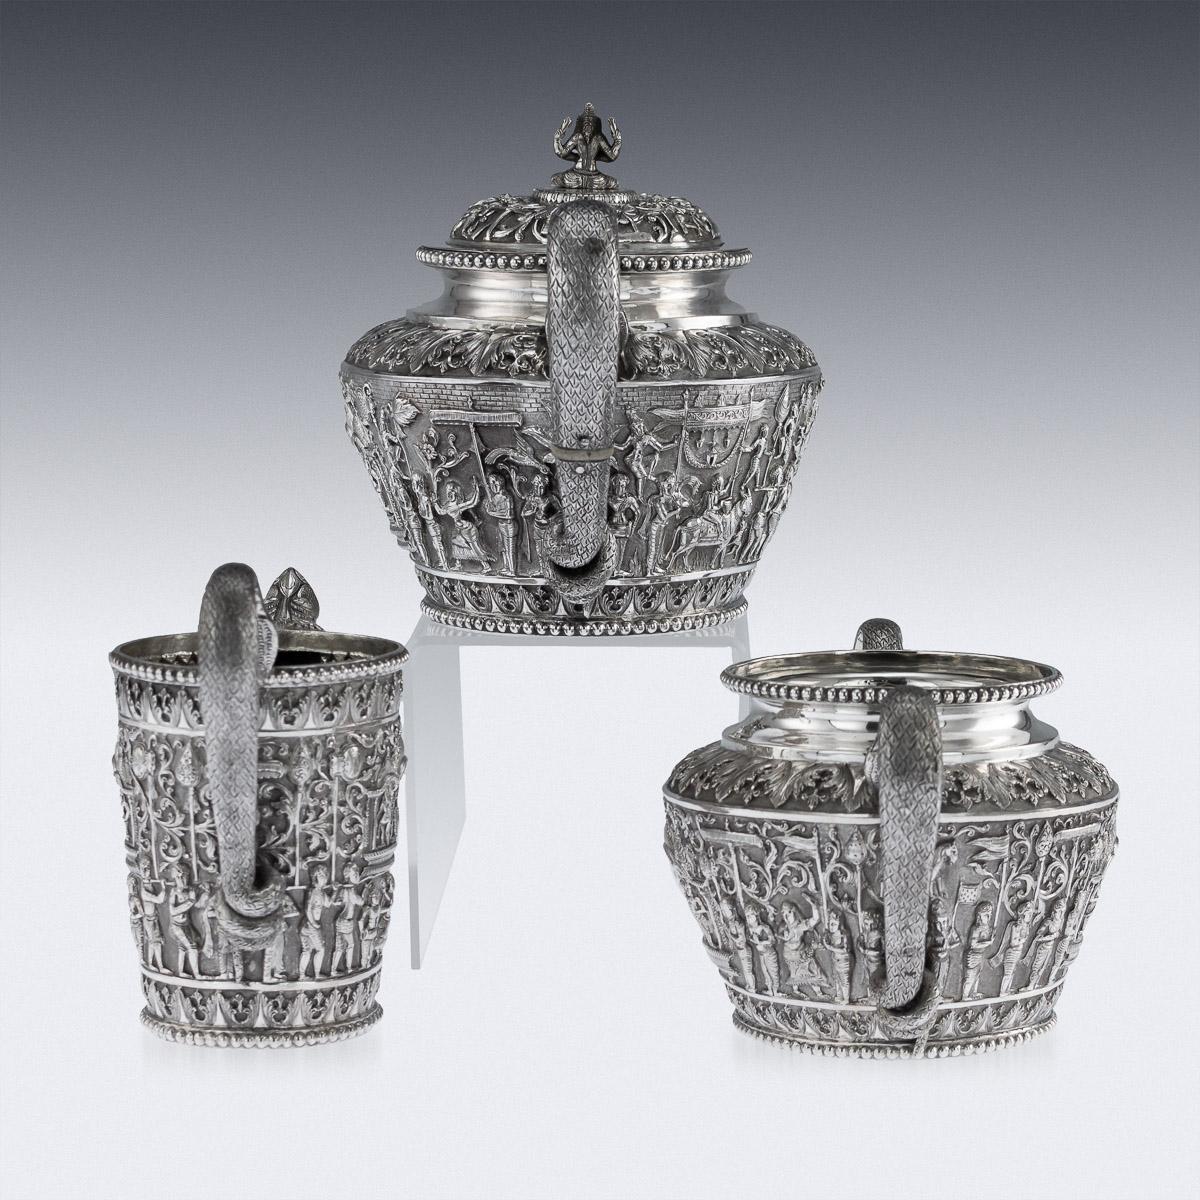 Antique 19th century Indian Colonial solid silver three-piece tea set, comprising of teapot, sugar bowl, & cream jug, each straight tapered body is profusely and beautifully repousse' decorated with a religious processions with men carrying idols, a